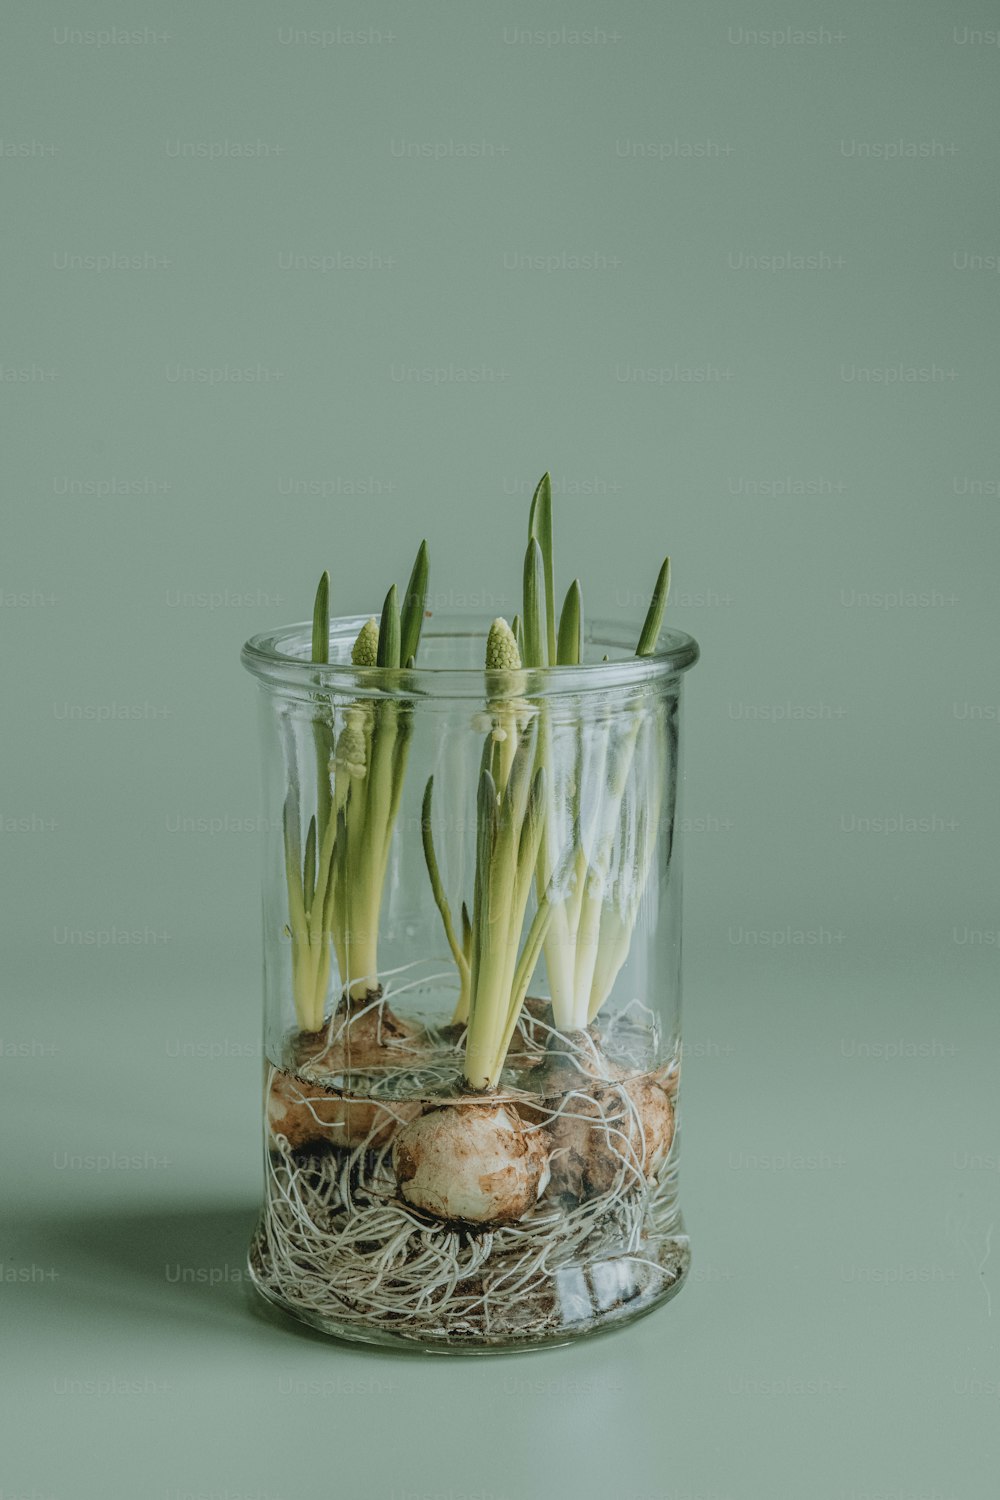 a glass jar with some plants in it